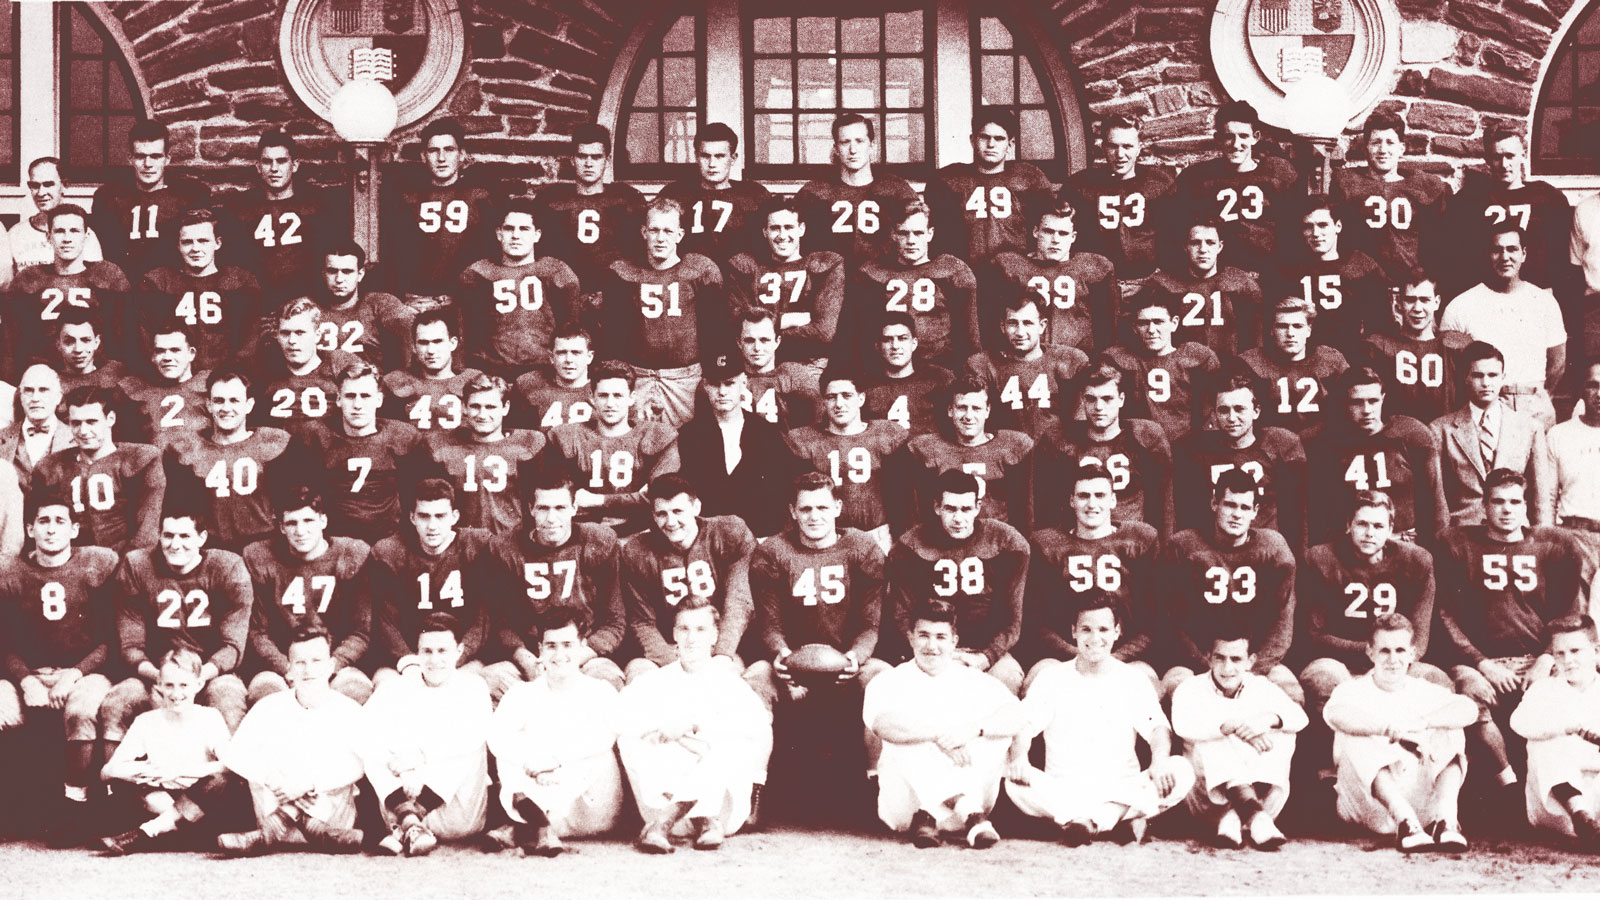 A group shot of the 1940 Cornell football team